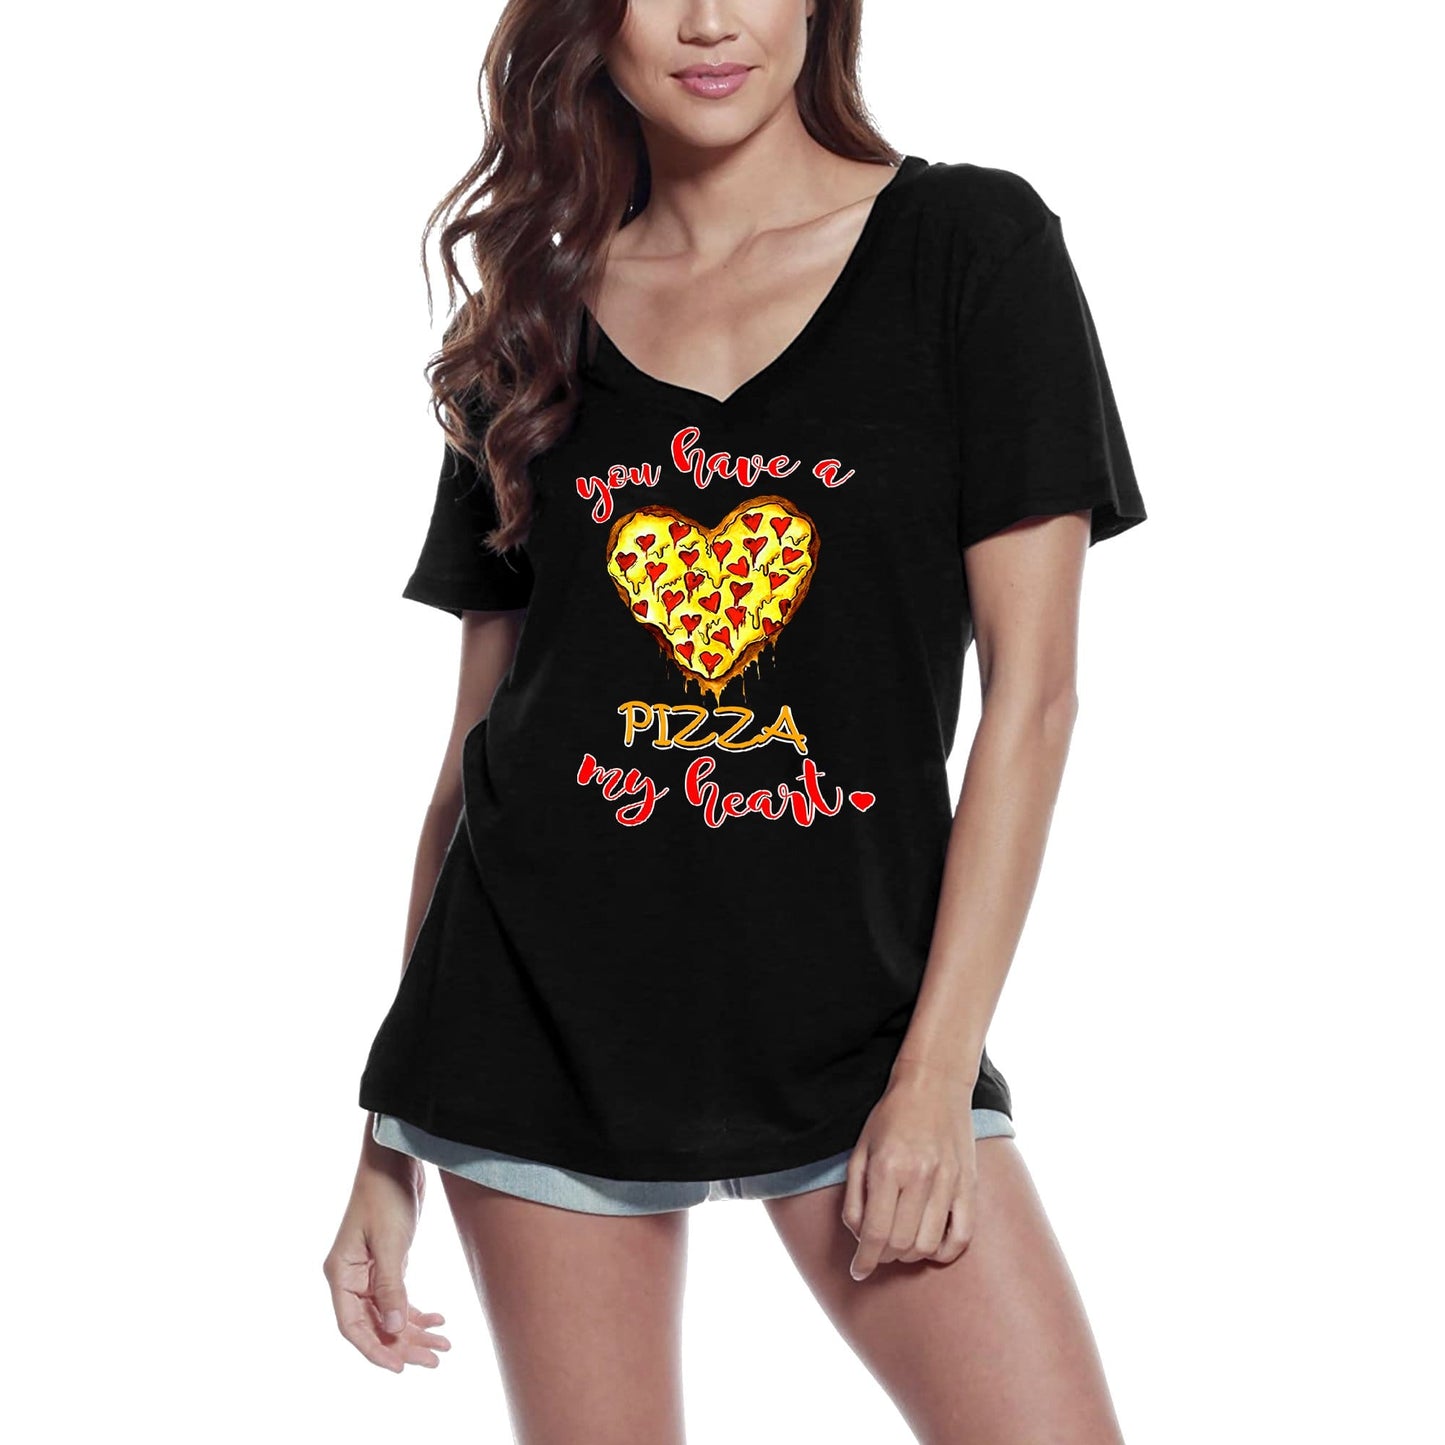 ULTRABASIC Women's T-Shirt You Have a Pizza My Heart - Funny Love Tee Shirt